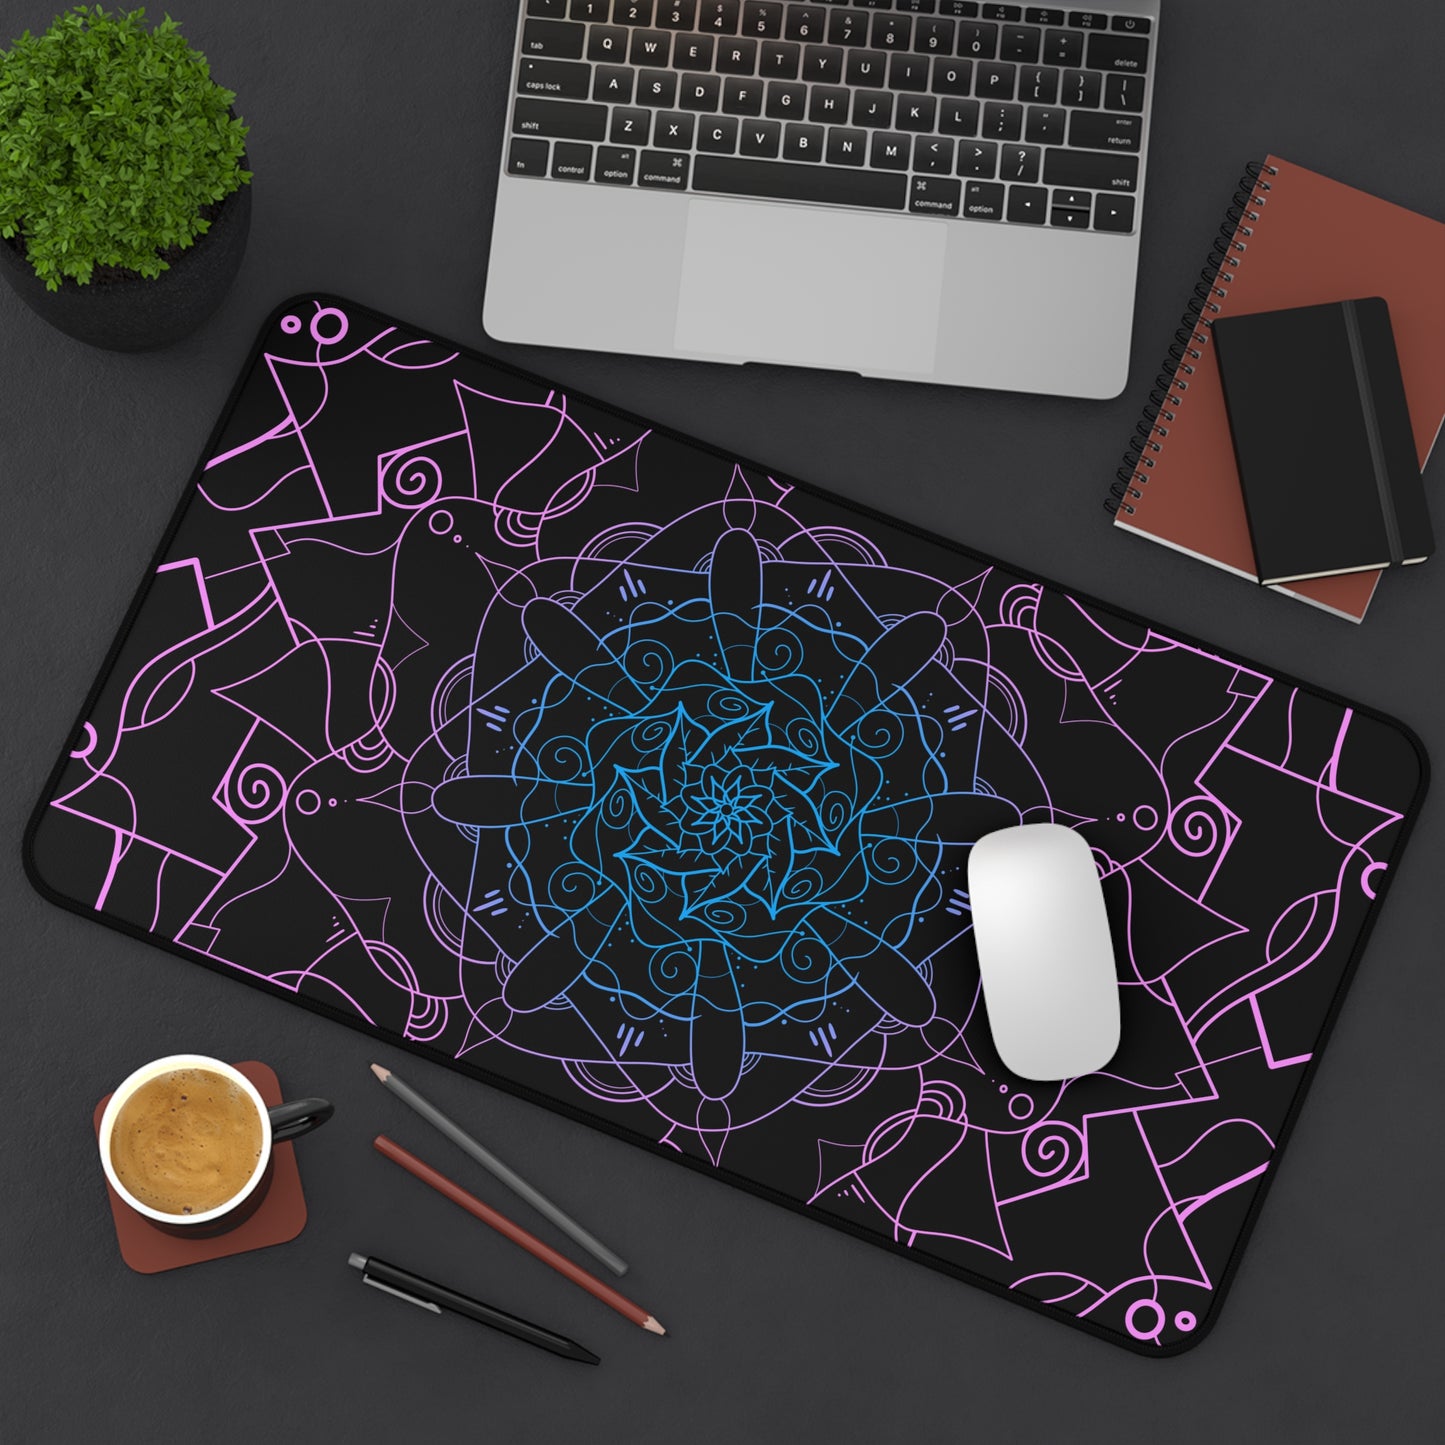 A 12" x 22" desk mat with a pink and blue mandala pattern on a black background sitting at an angle.